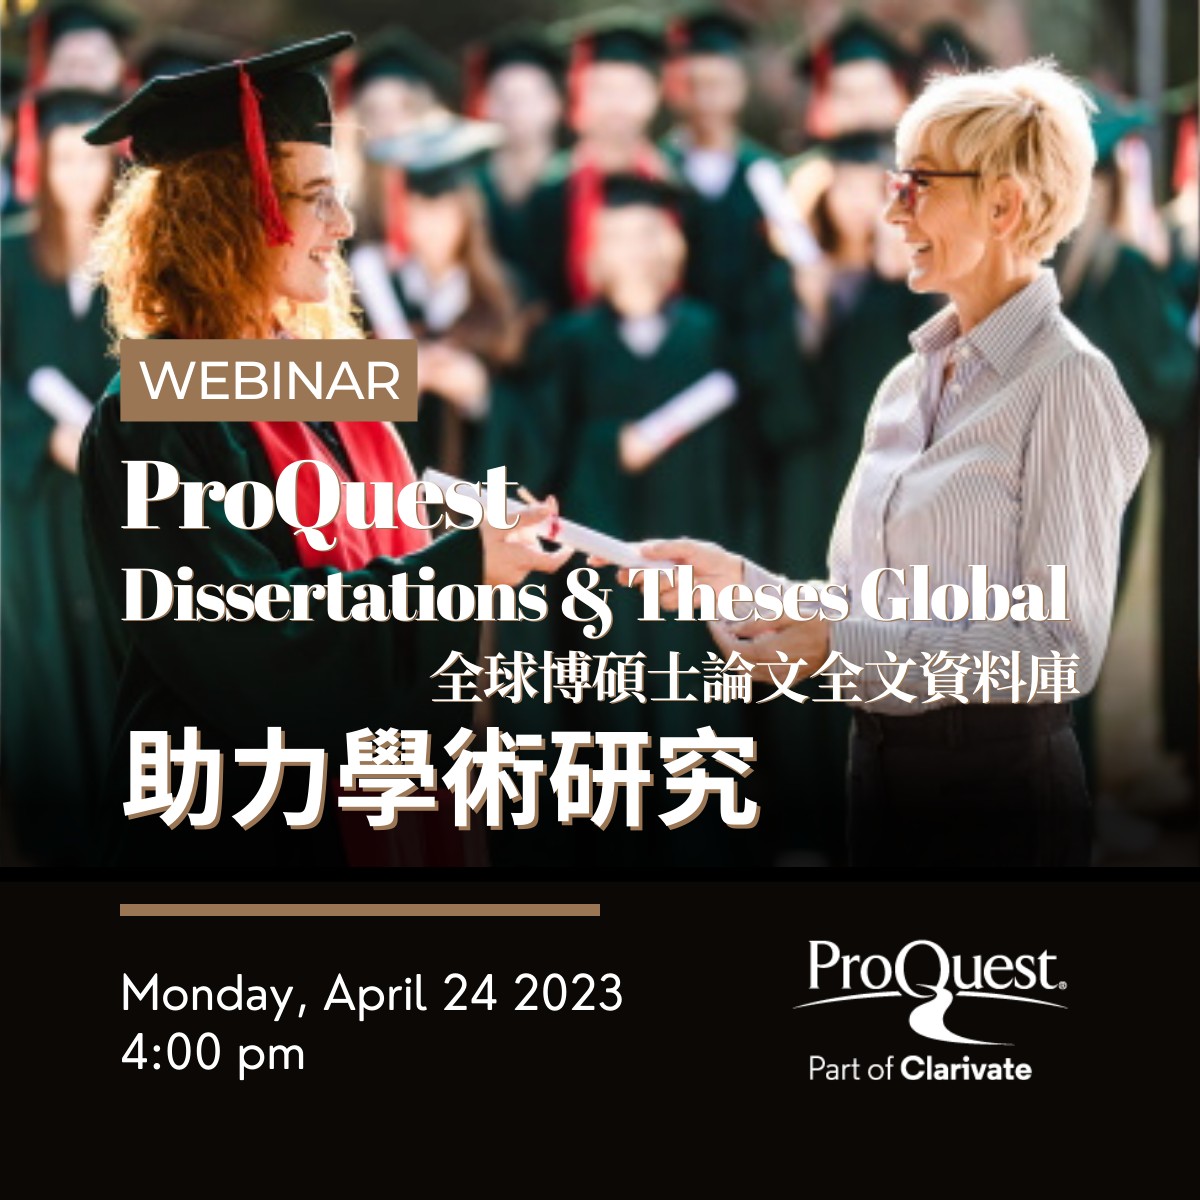 ProQuest Dissertations & Theses Global 助力學術研究